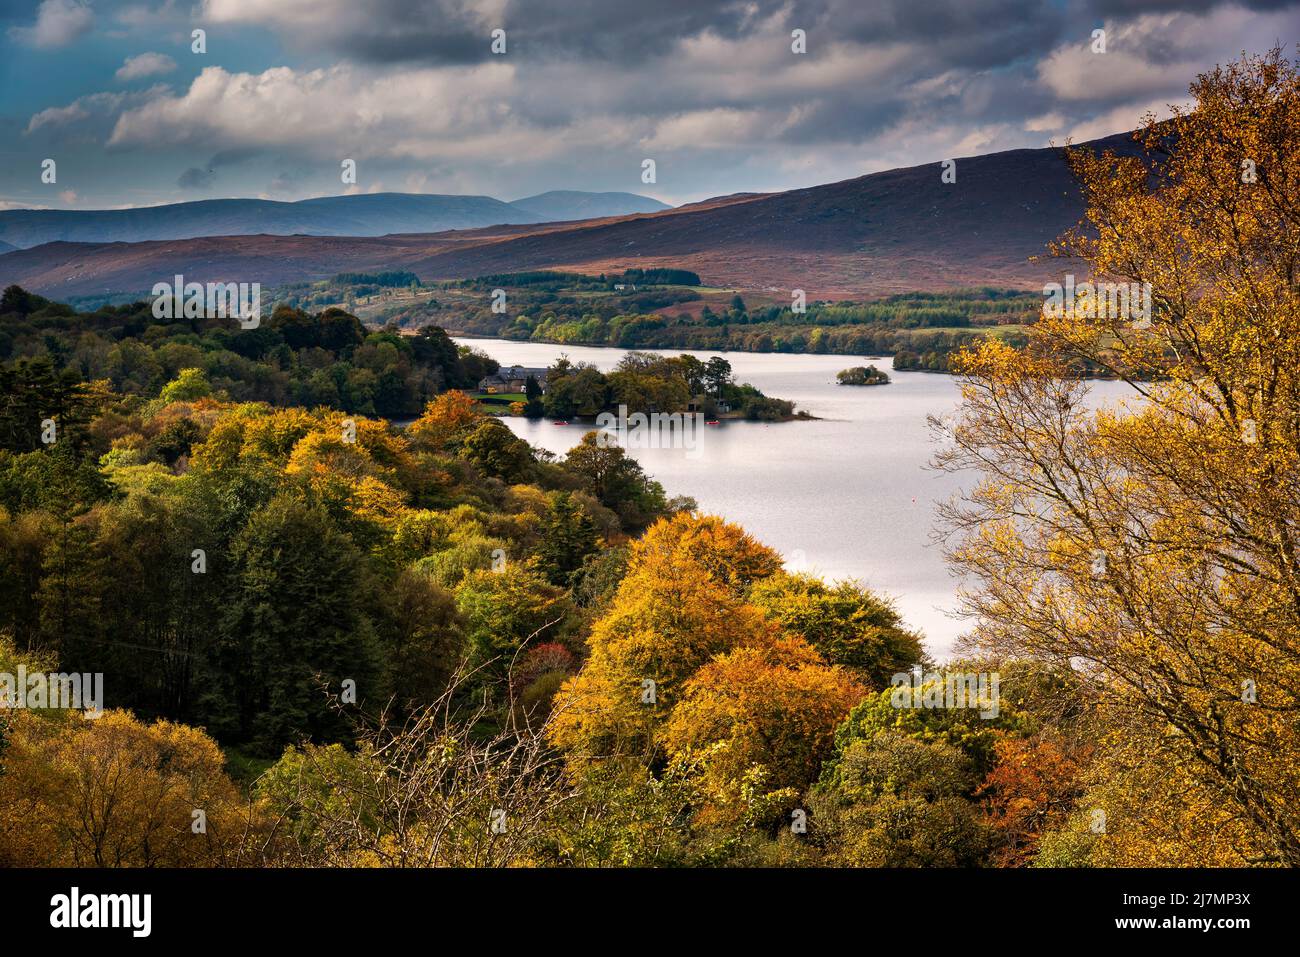 Autumnal view over trees and lake in a hillside / valley setting, Gartin Lake, County Donegal, Ireland Stock Photo